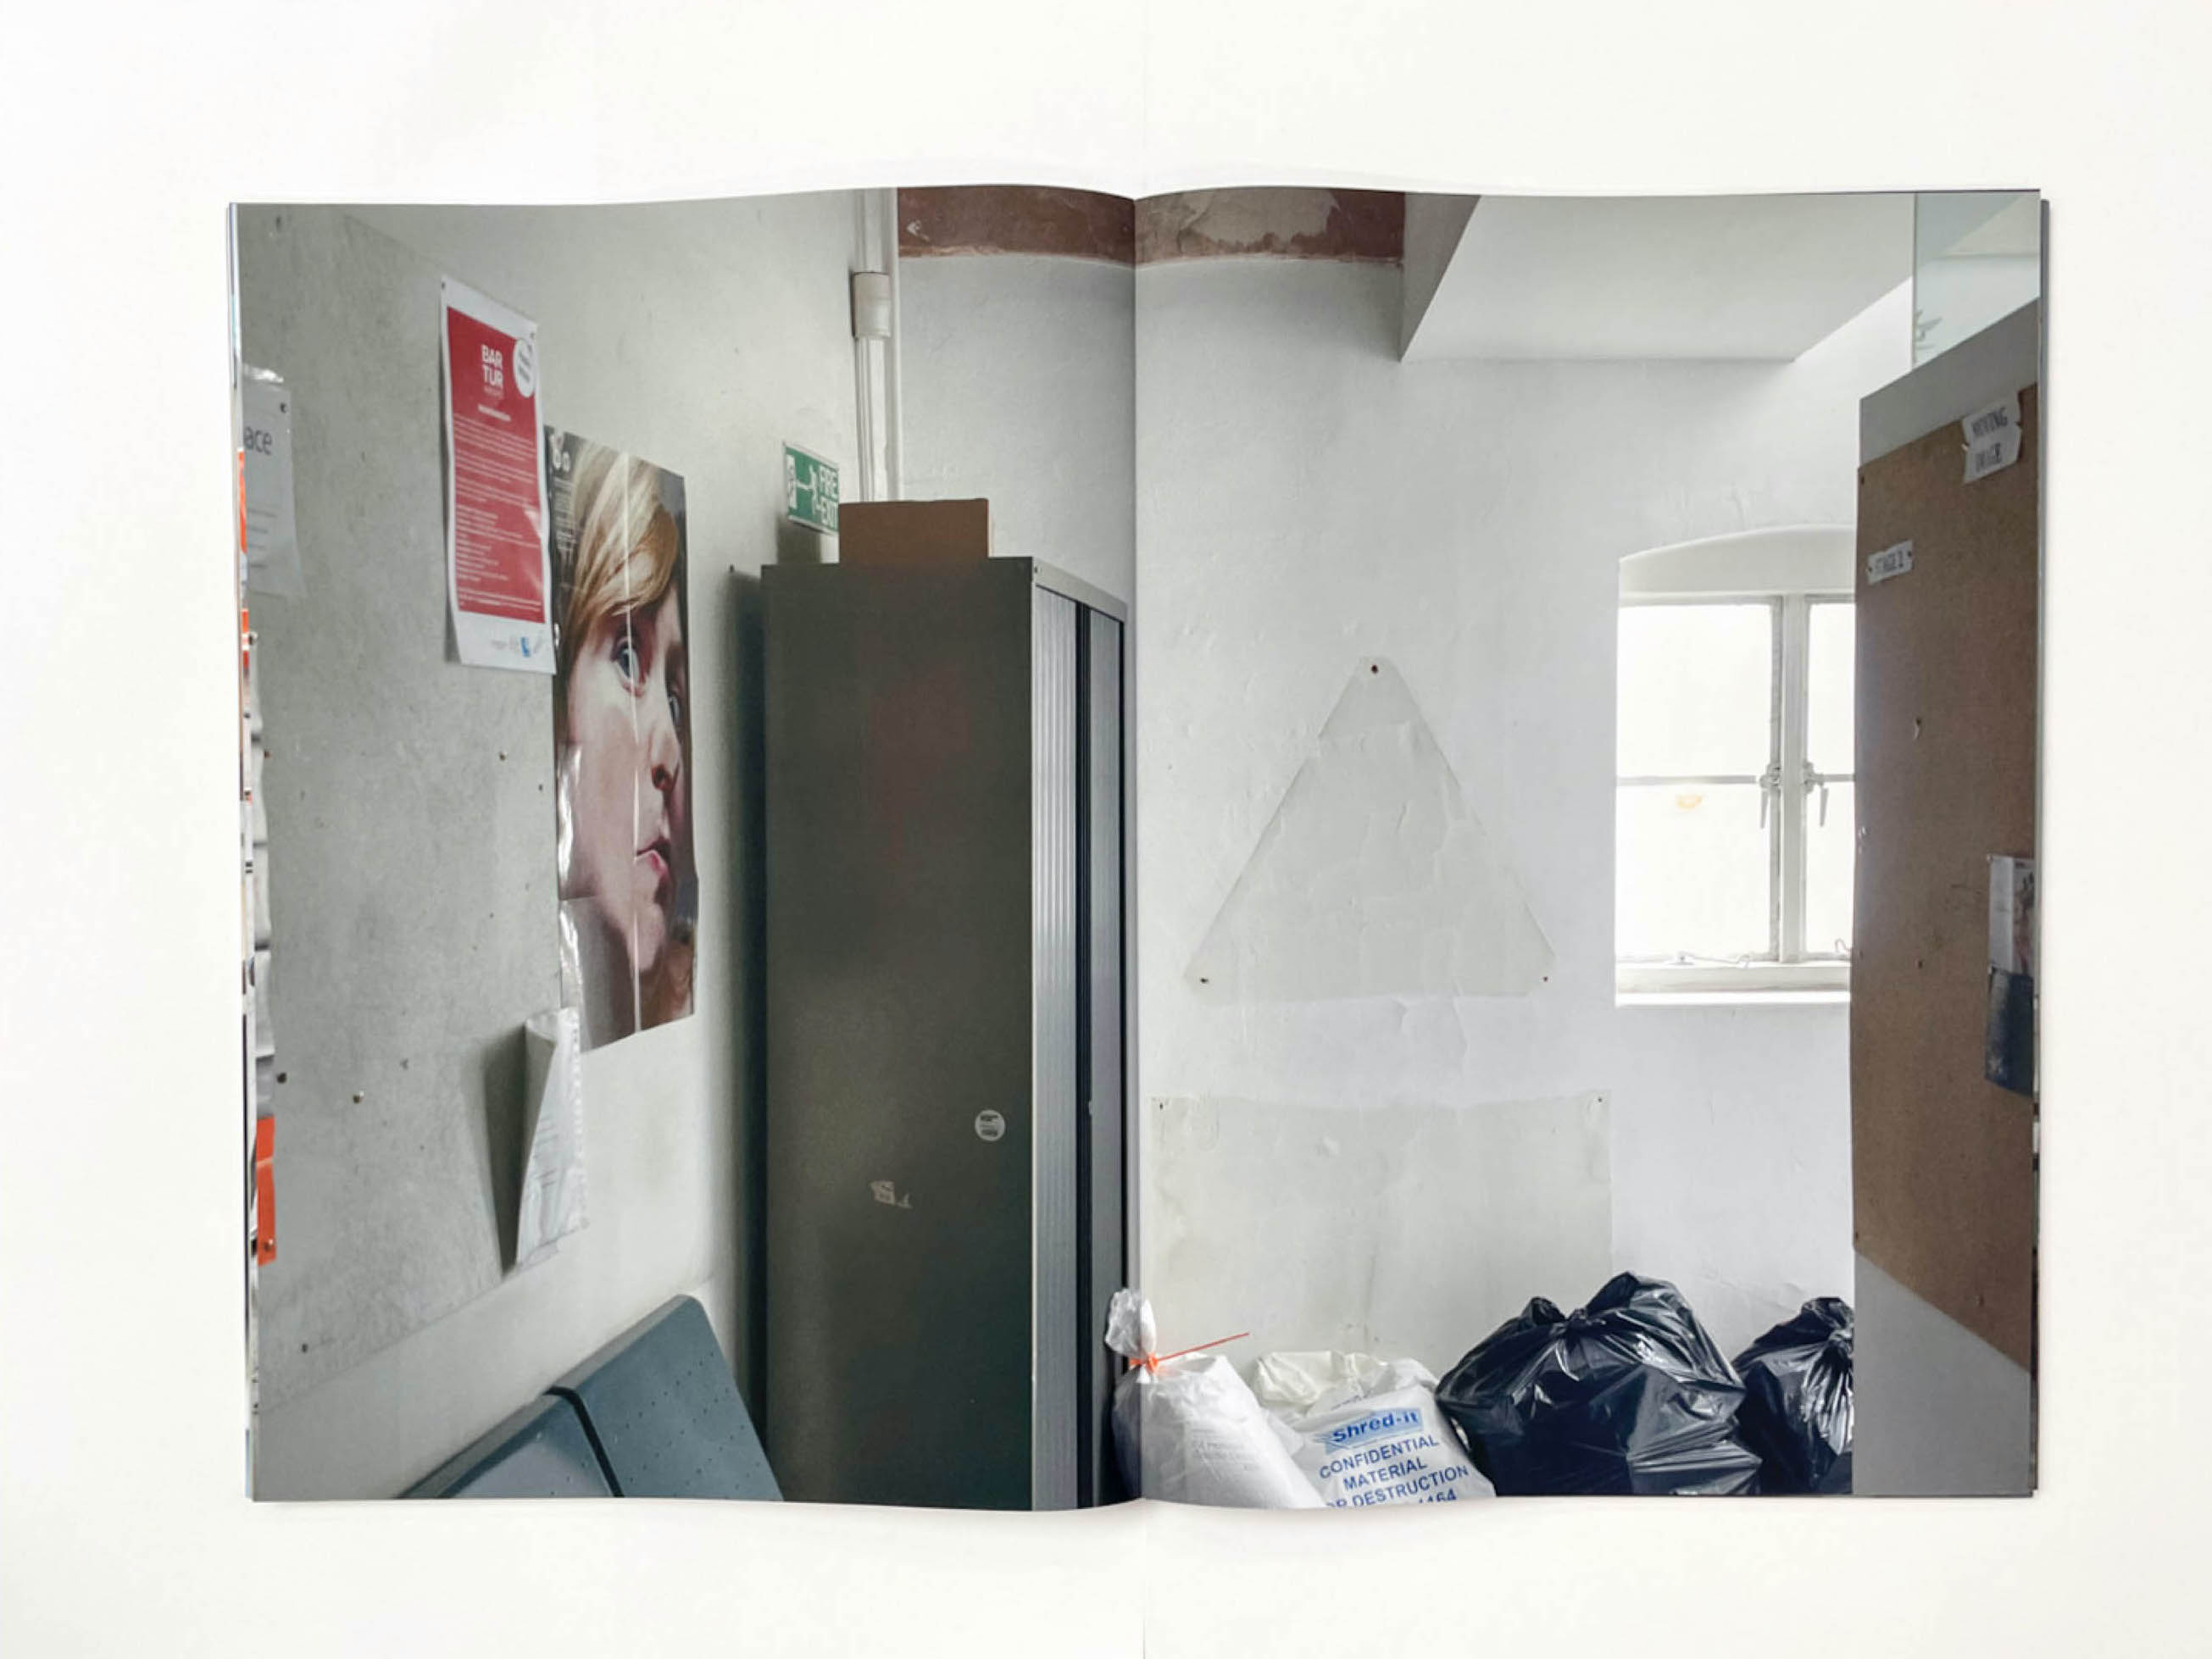 the corner of a corridor with plastic bin bags, on the wall a poster shows a womans face squashed against glass